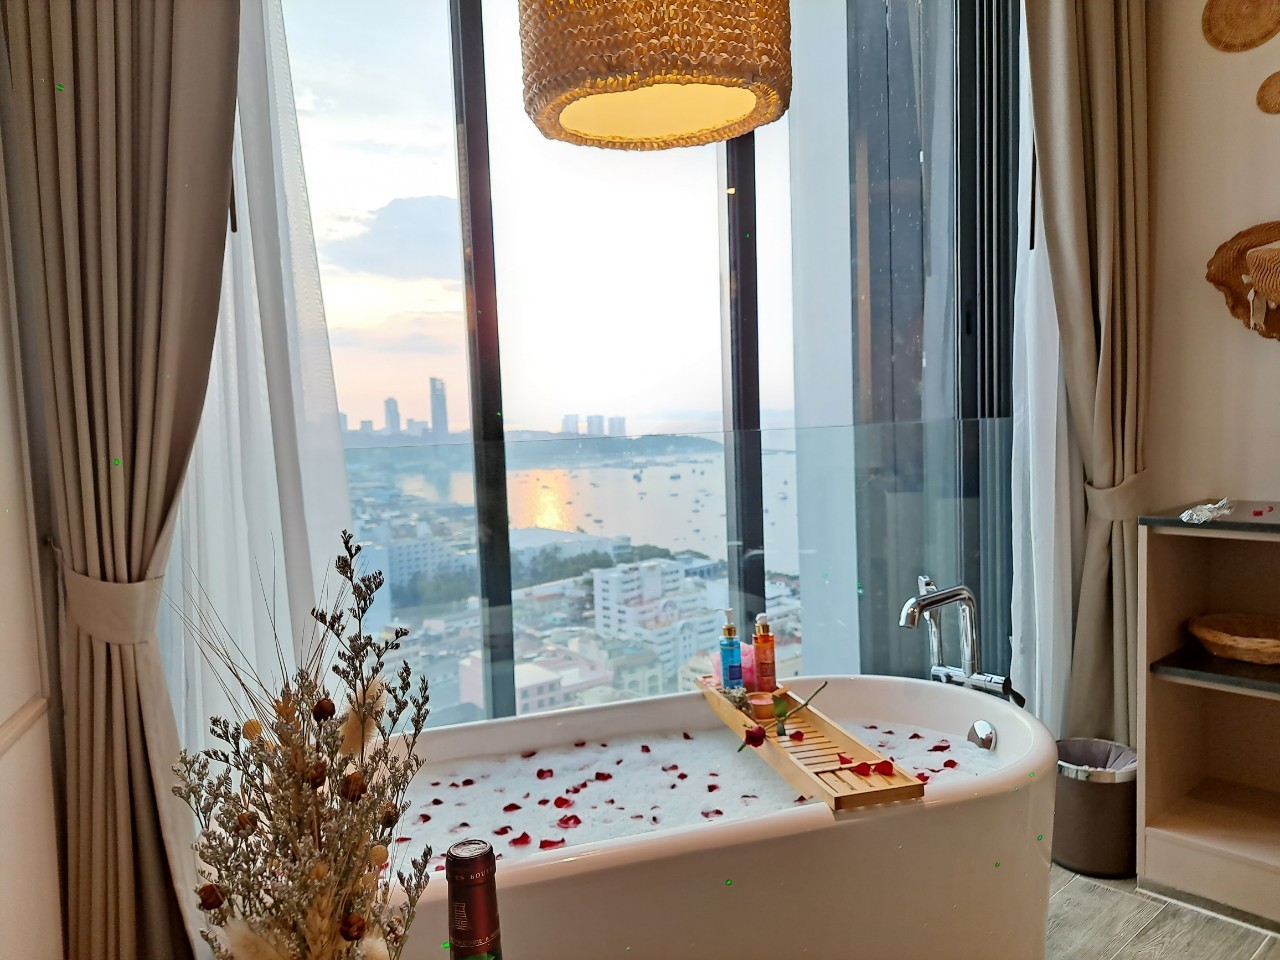 A bathtub  filled with rose petals with city views and water in the background